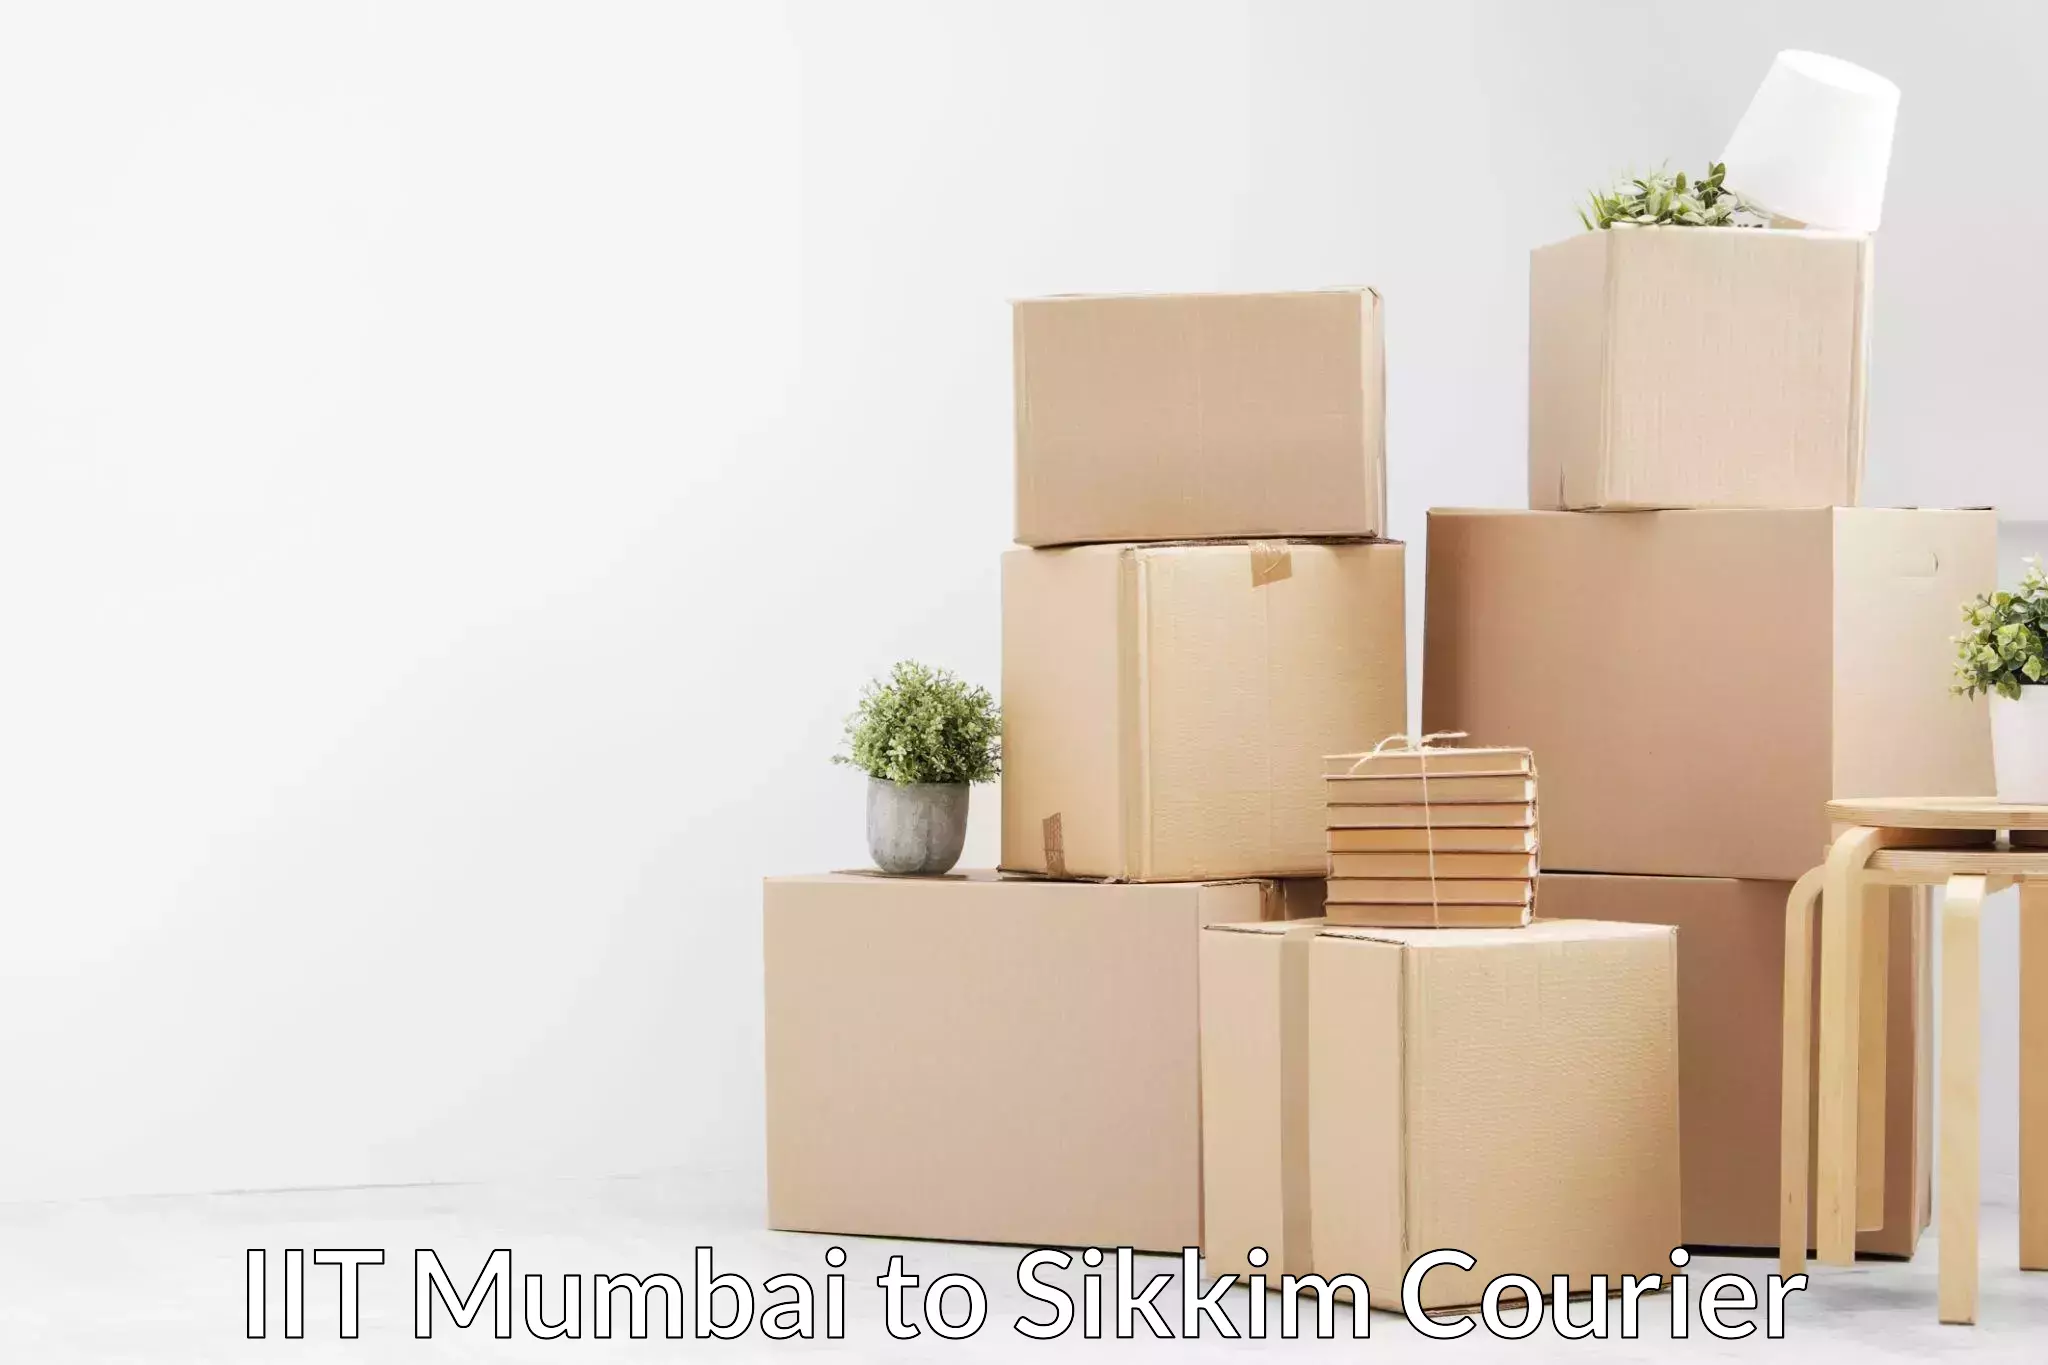 Budget-friendly moving services IIT Mumbai to Sikkim